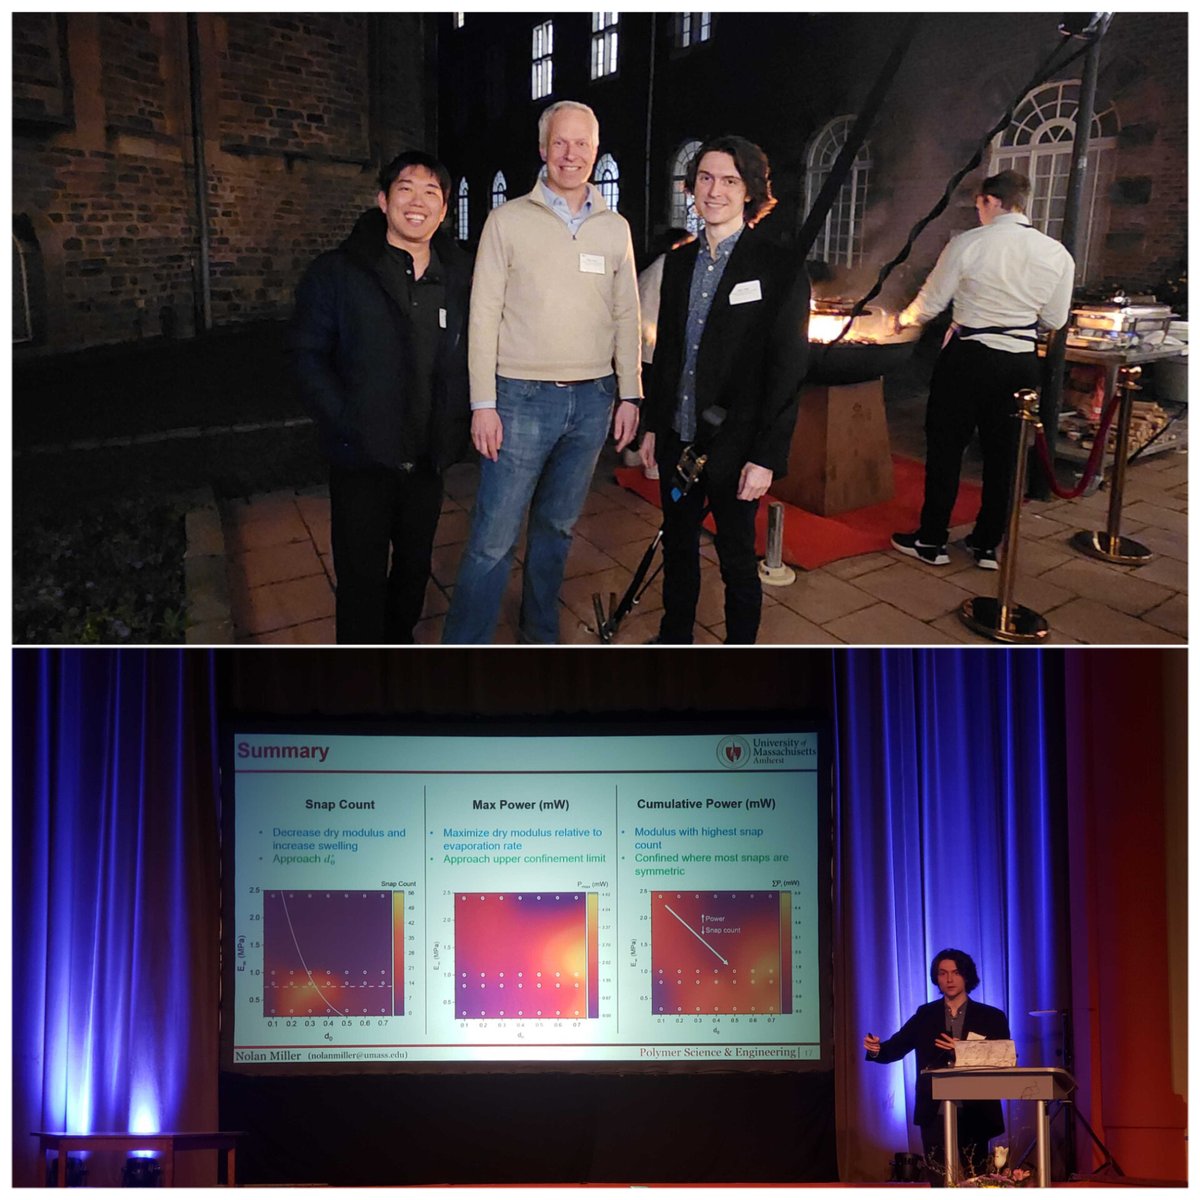 Greetings from the Netherlands! ✈️🌍 The Crosby Group was strongly represented at the International Conference on Deformation, Yield and Fracture of Polymers (DYFP) this year! Great job, Nolan and Myounguk, for your contributions! #science #conferenceseason